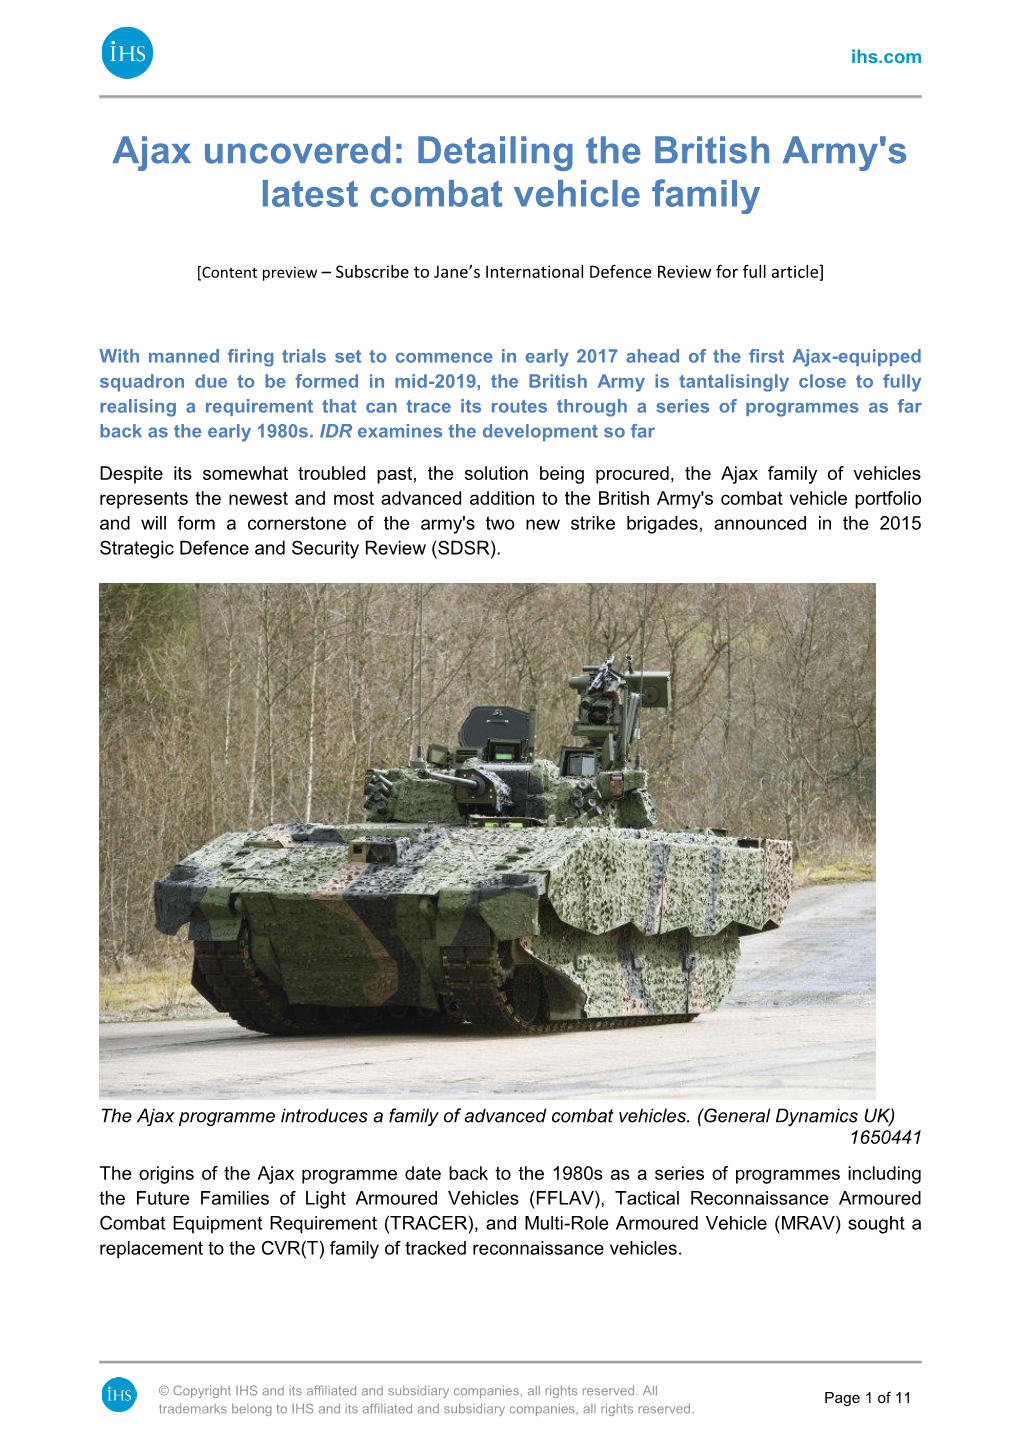 Ajax Uncovered: Detailing the British Army's Latest Combat Vehicle Family